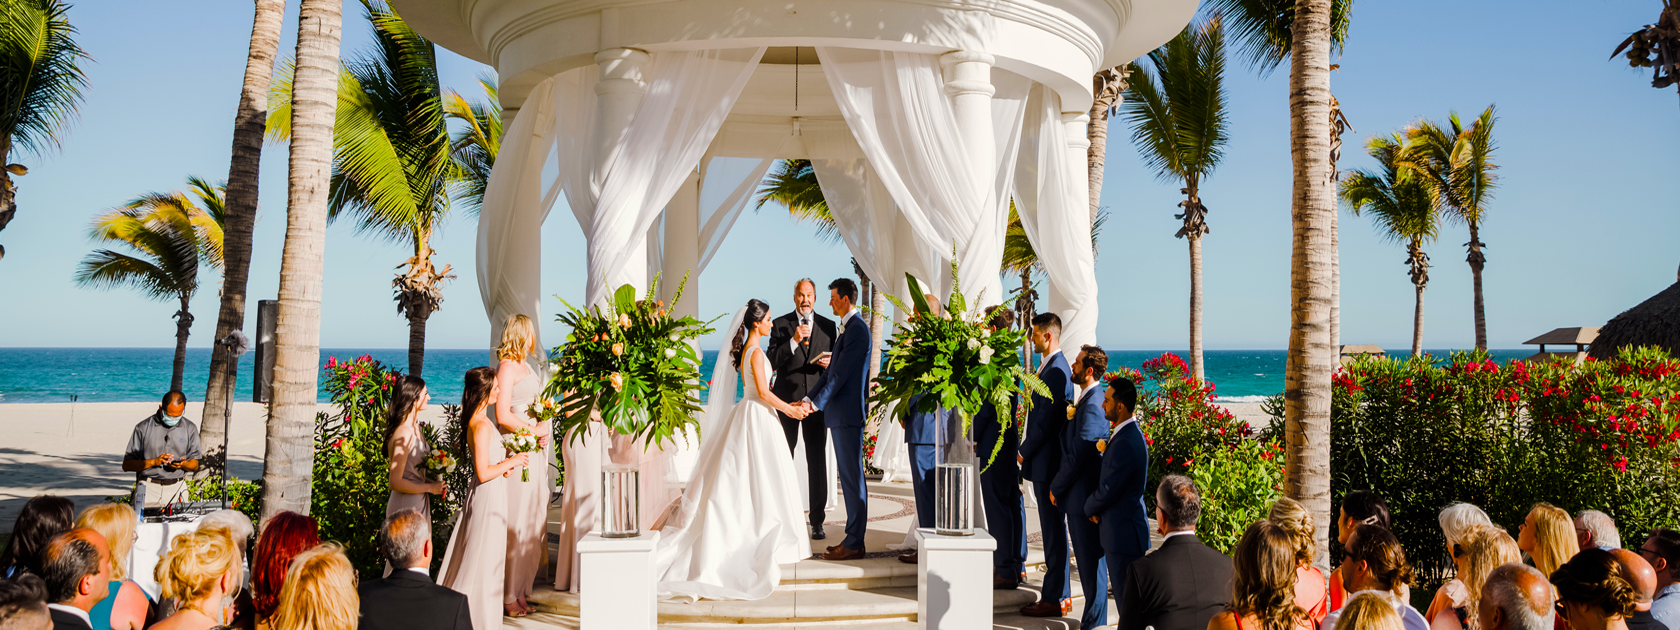 Featured image for “Top 5 Reasons – Mexico Destination Weddings”